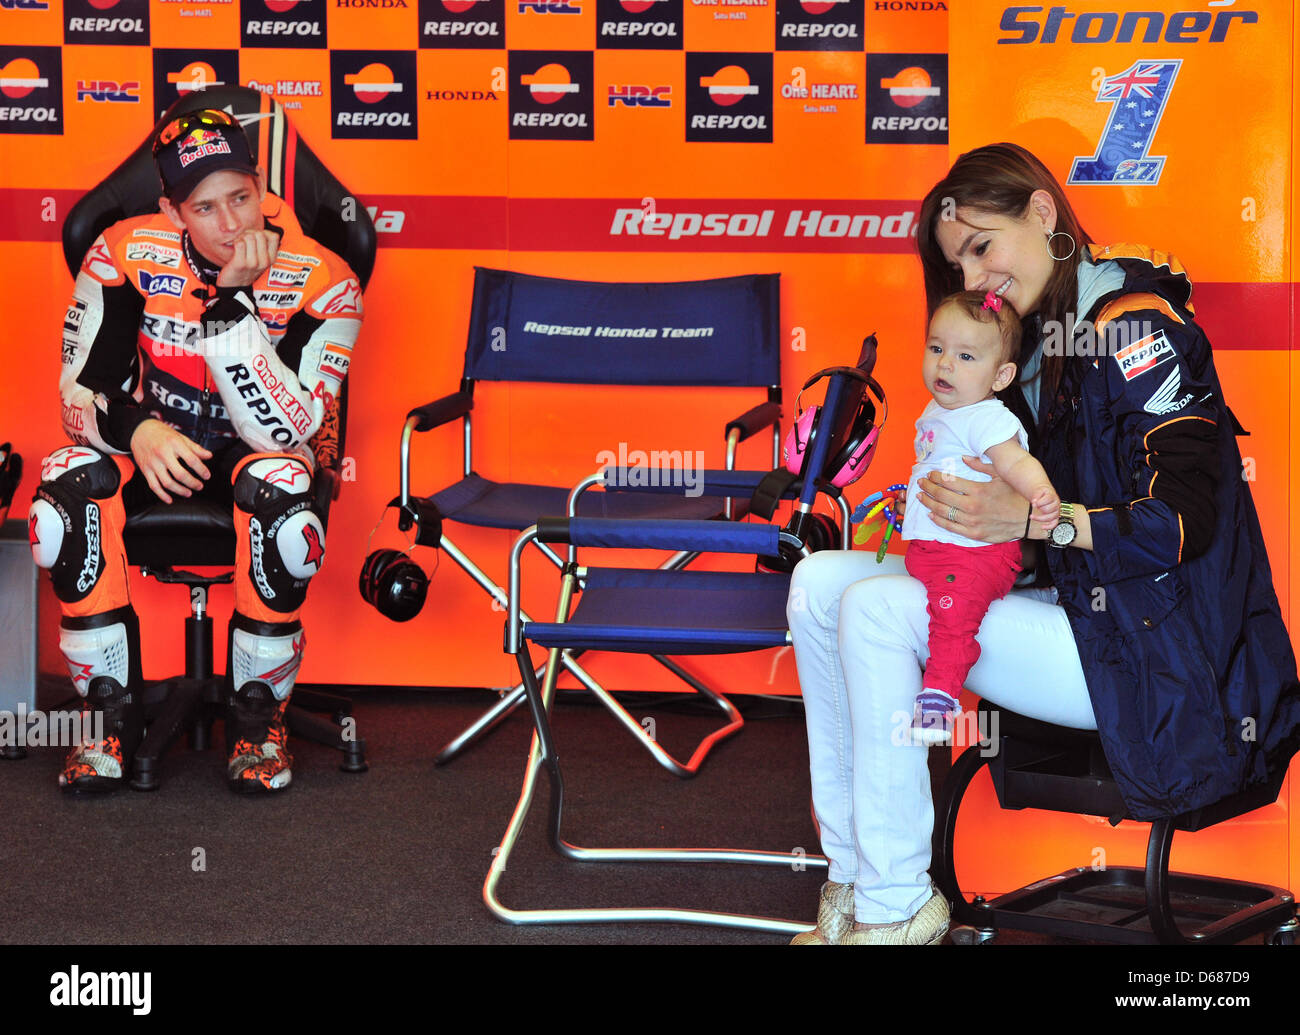 Australian MotoGP racer Casey Stoner from team Repsol Honda and his wife Adriana sit in the Honda box before training for the German Grand Prix on the Sachsenring in Hohenstein-Ernstthal, Germany, 06